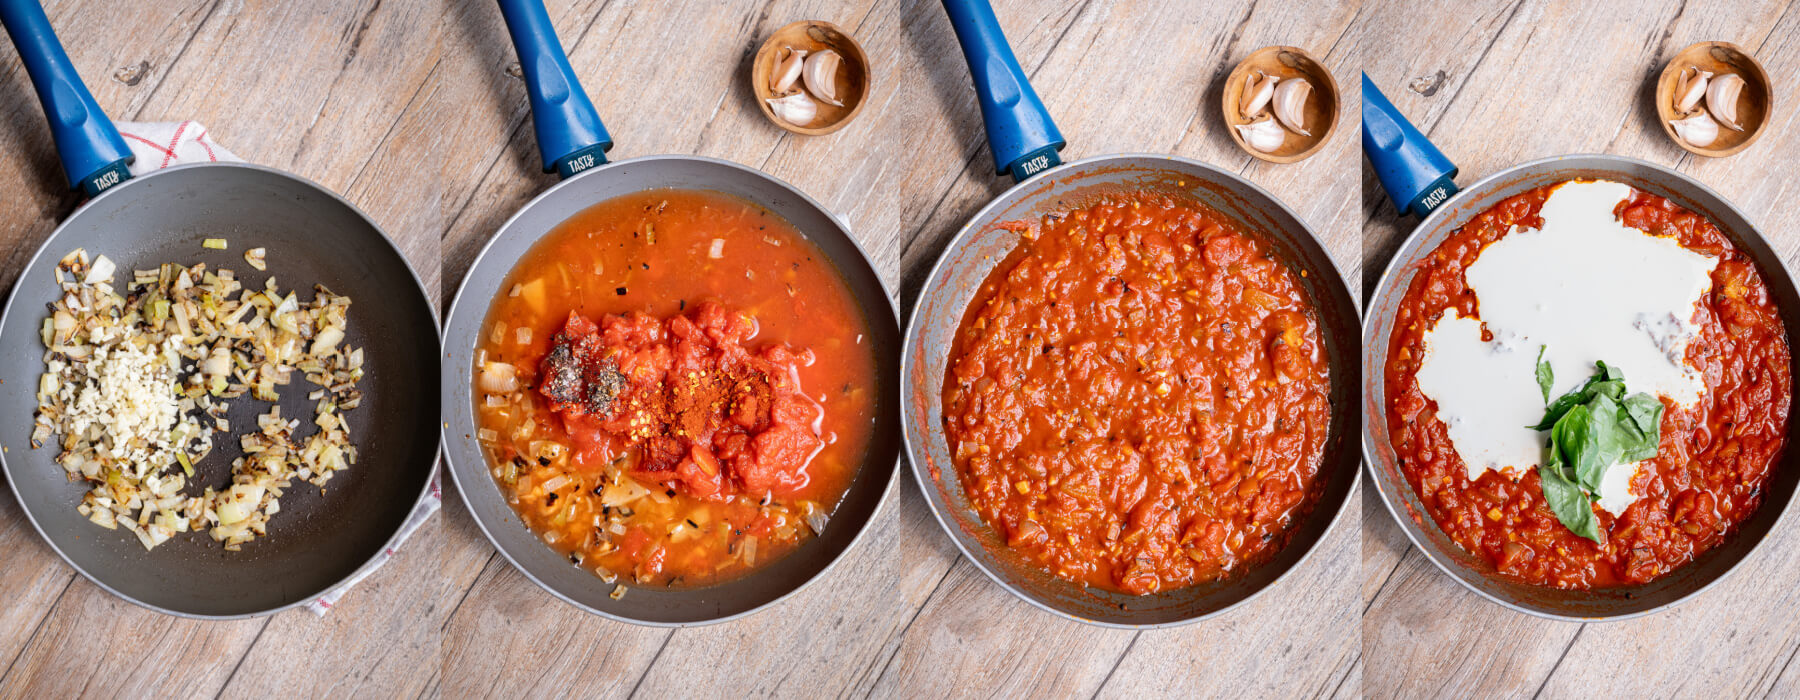 A series of process images showing how to make rosé sauce with vegetables, tomatoes, and cream.